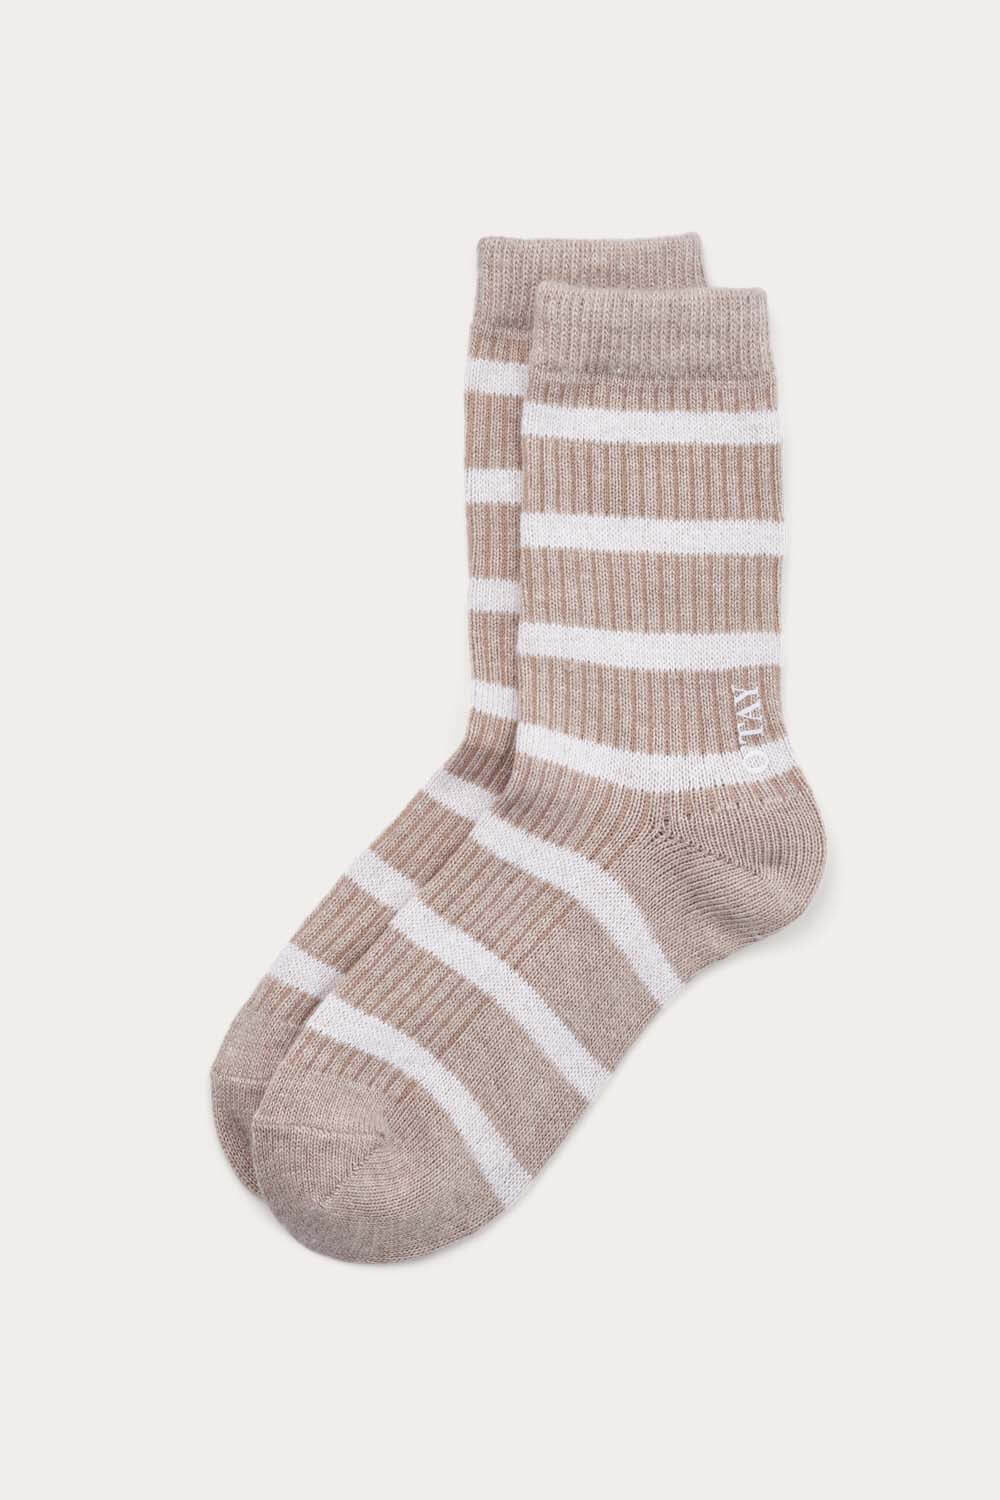 O'TAY Striped Socks Blend Accessories Taupe/Off White